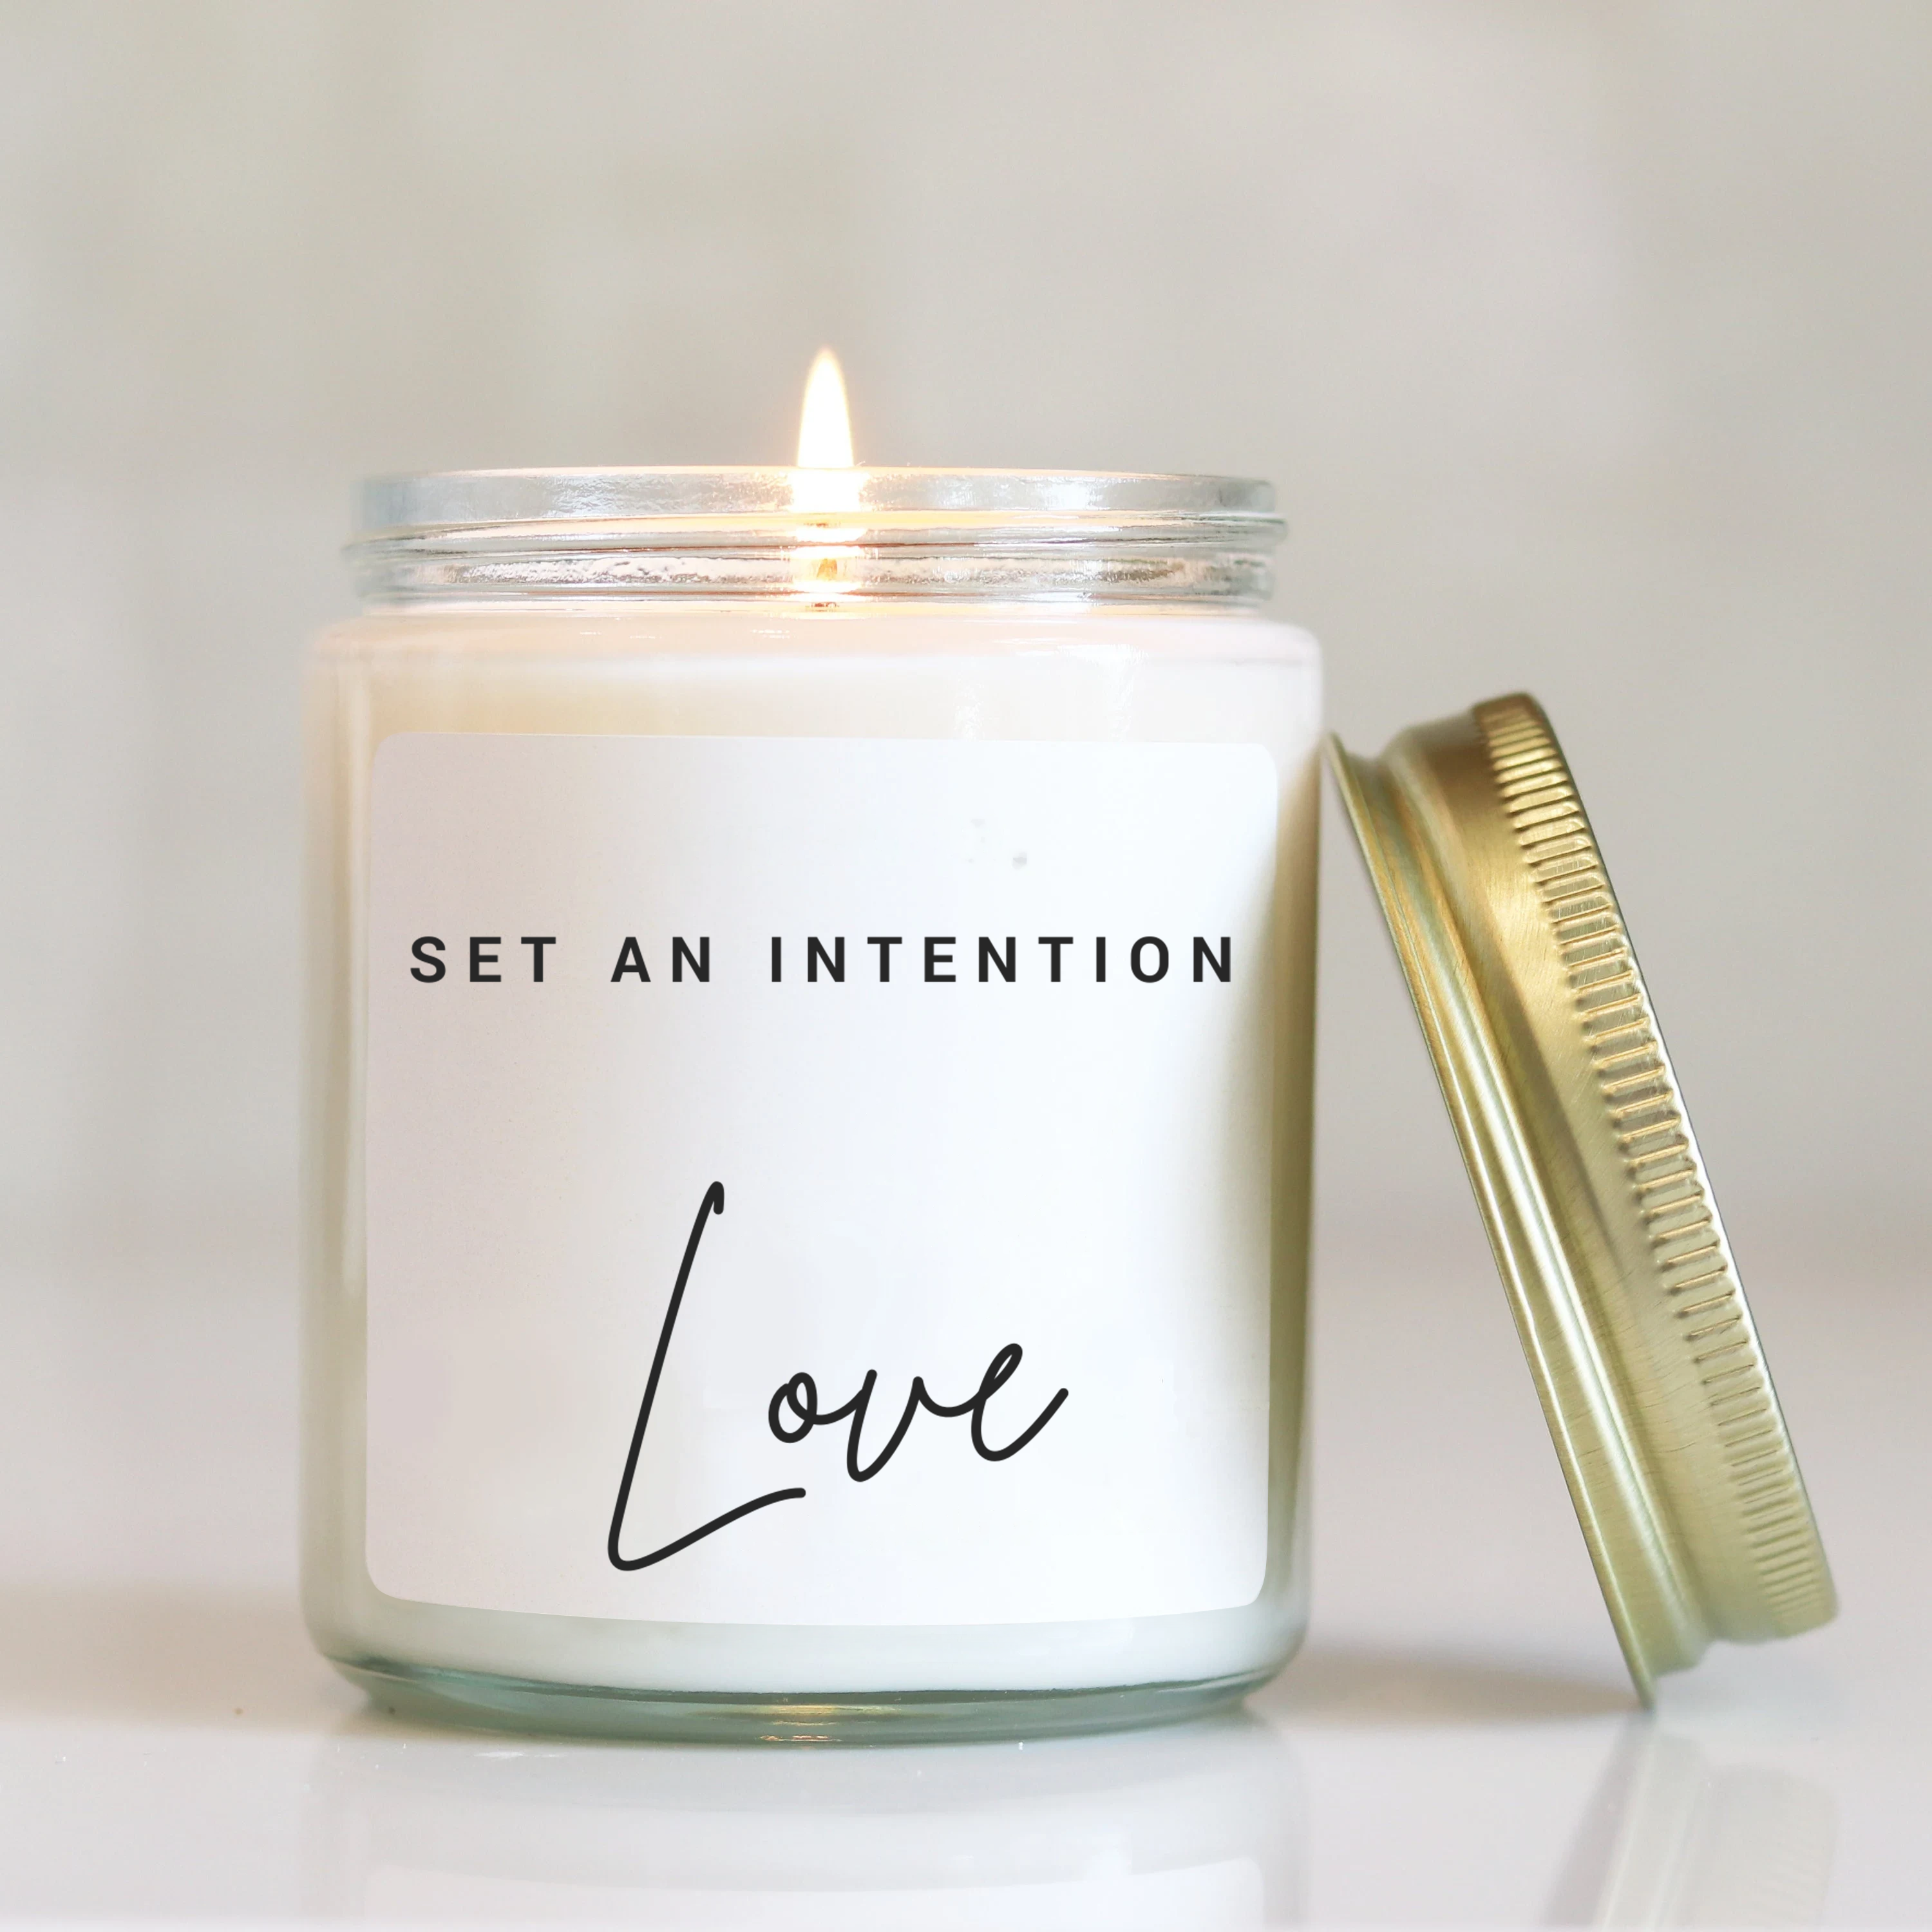 Set An Intention For Peace - 8 oz Soy Intention Candle - Tools for